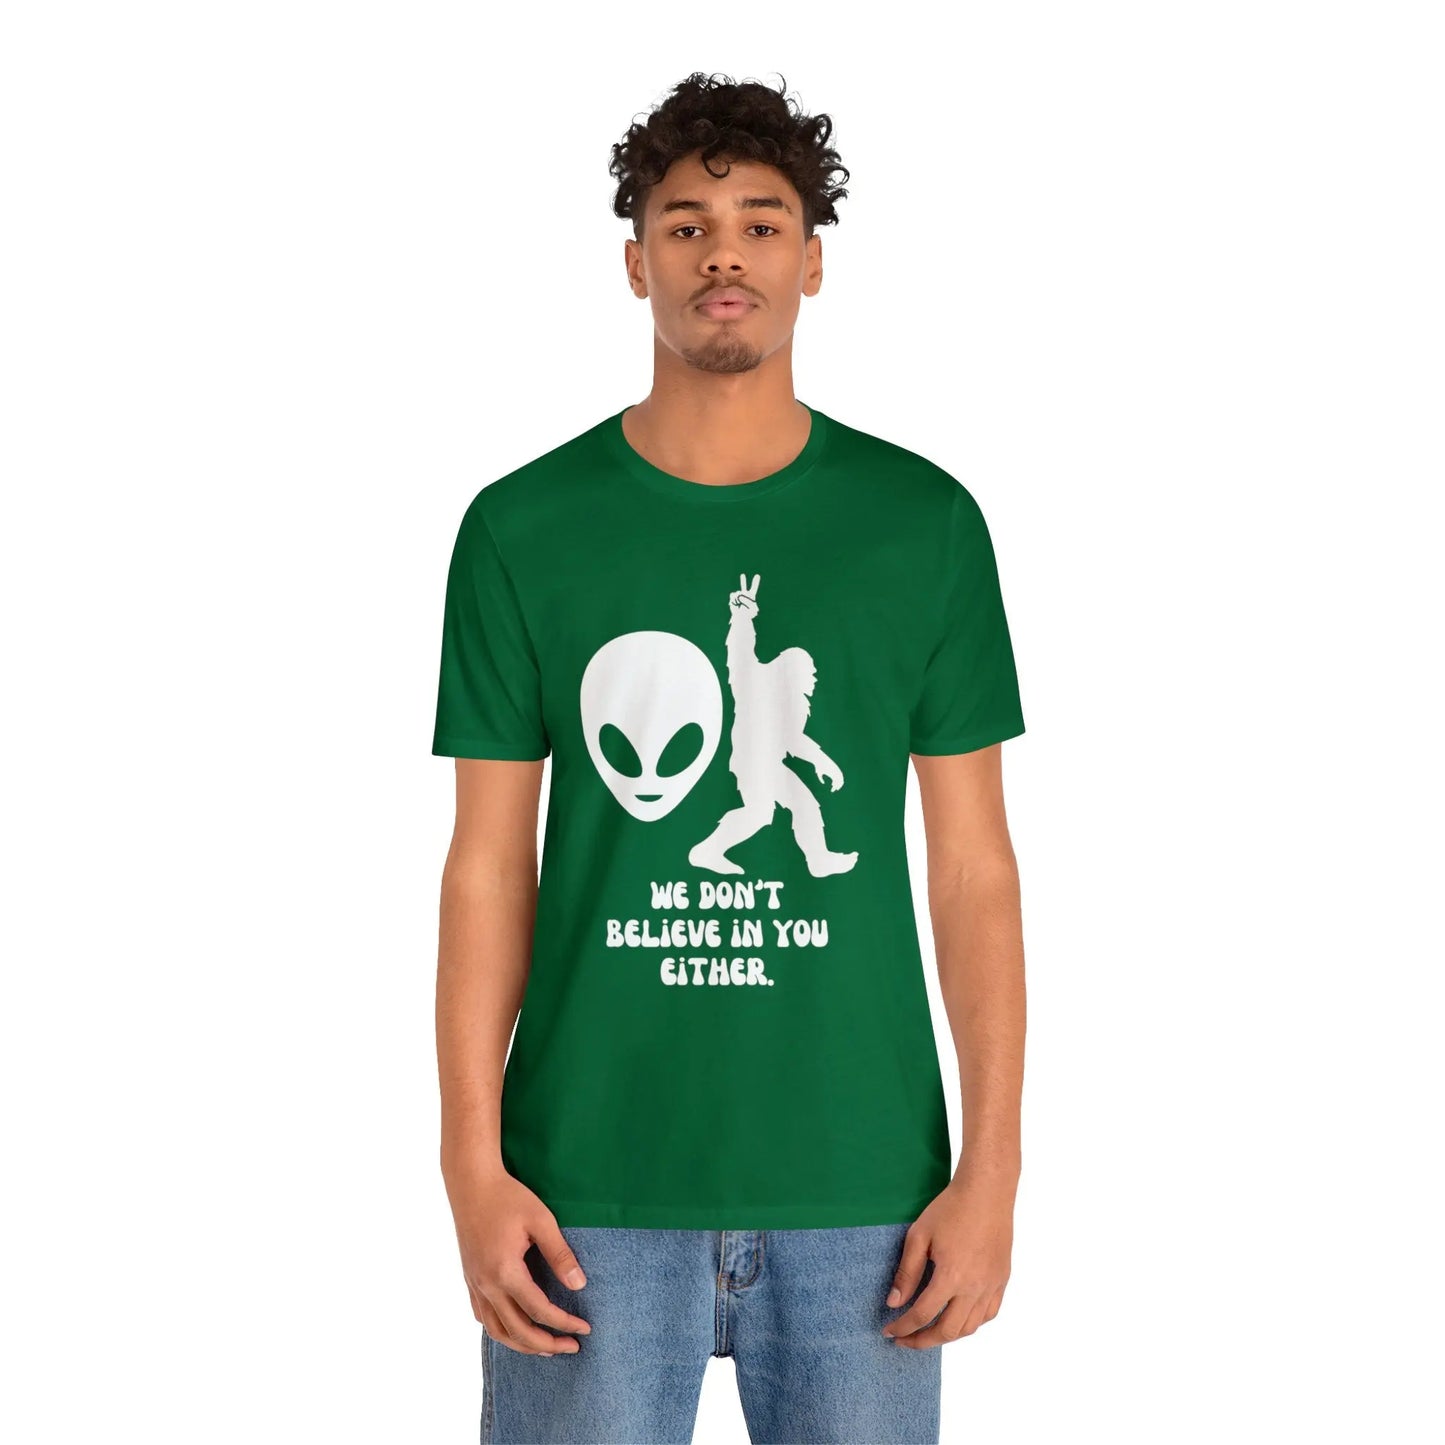 Alien and Bigfoot we don’t believe in you either t shirt